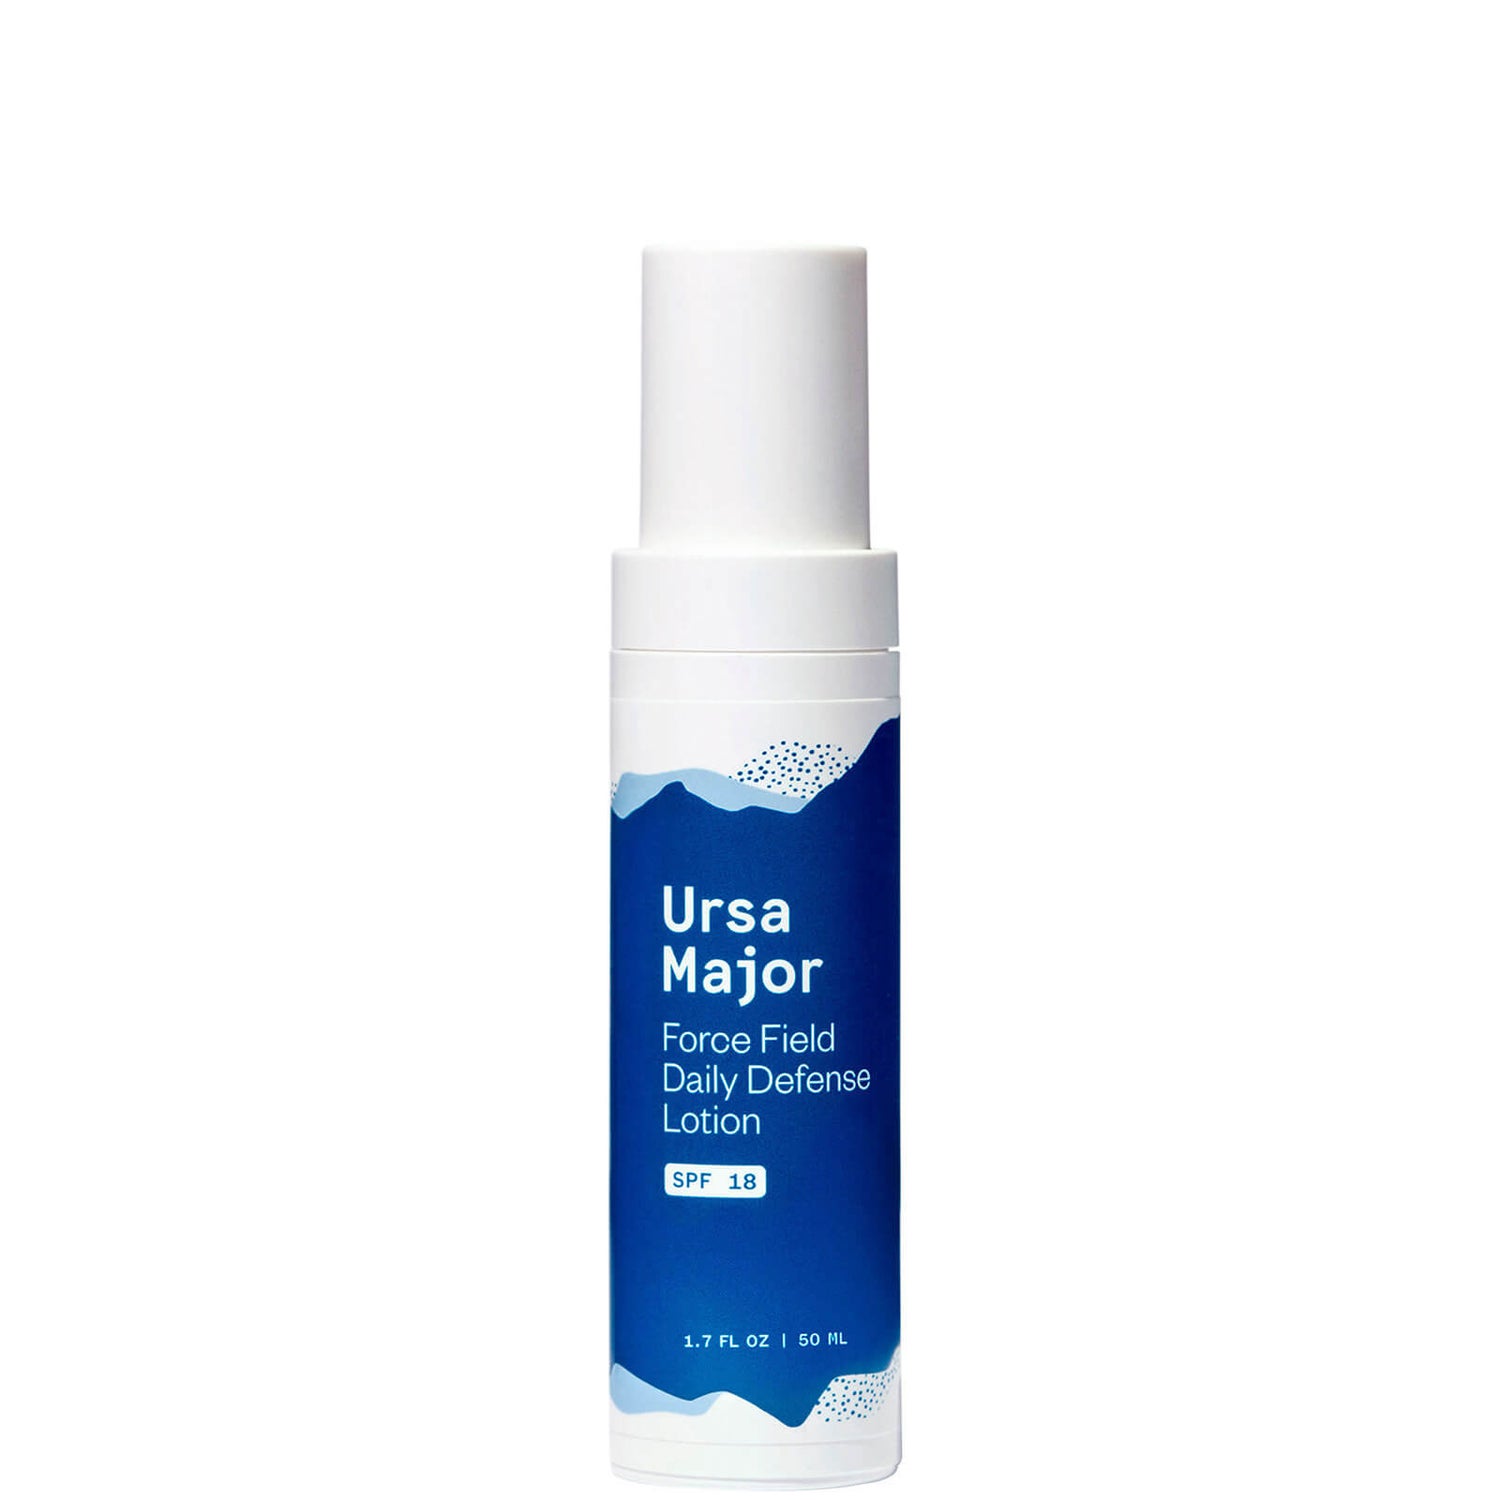 Ursa Major Force Field Daily Defense Lotion with SPF 18 (1.7 fl. oz.)